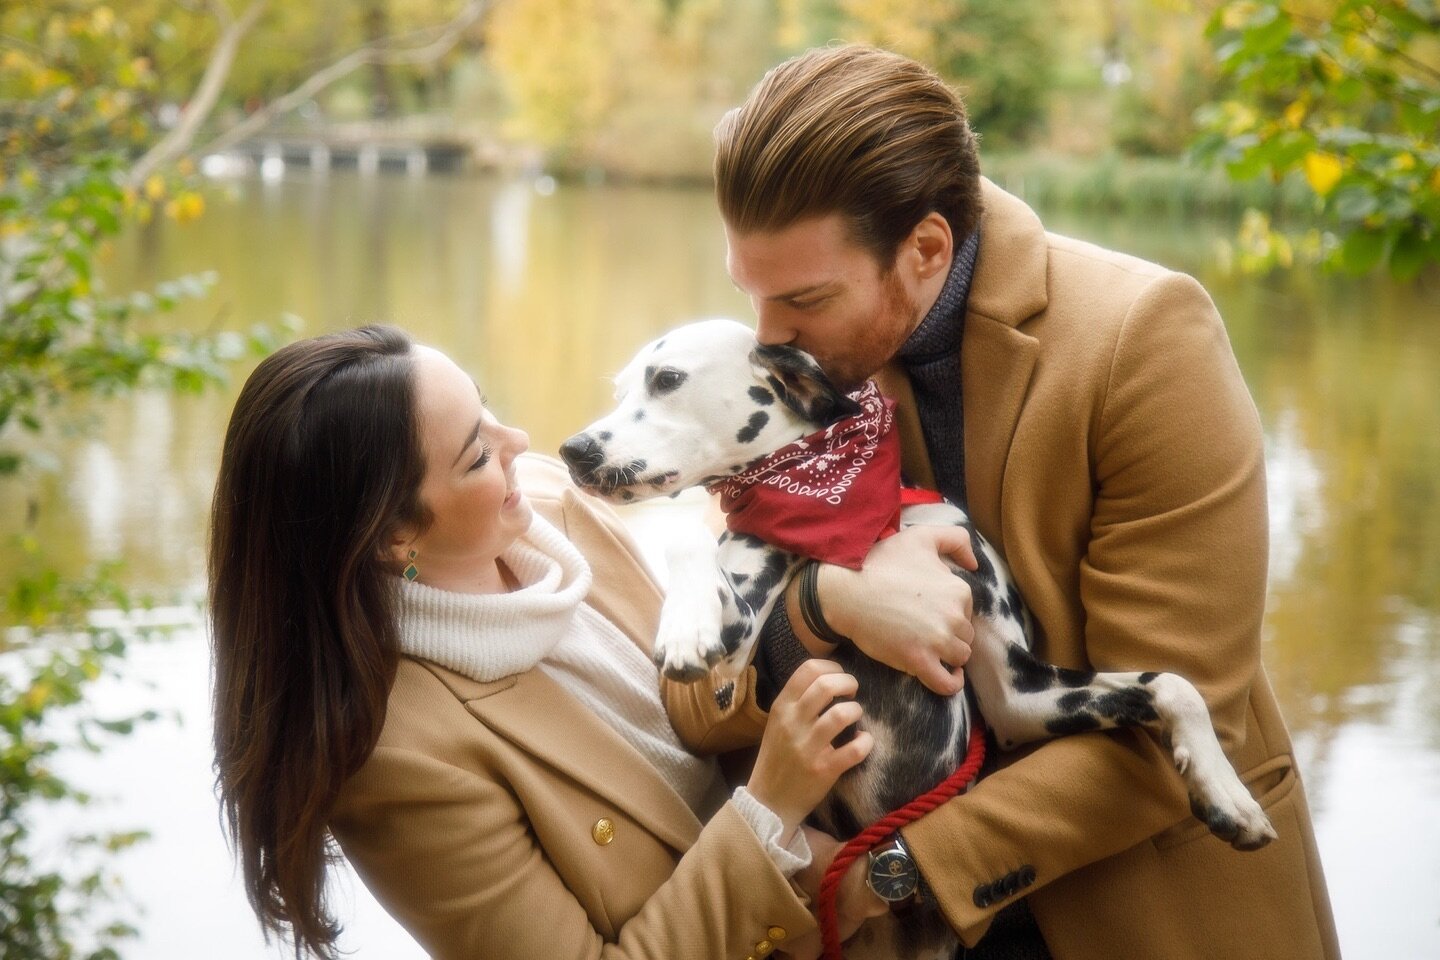 A beautifully autumnal engagement shoot on Hampstead Heath. Thank you for the laughs @lucysemmens and @julien_houeix 🐾
.
.
.
#dalmatiansofig #dalmatianspotlight #dalmatiandog #dalmatianclub #dalmatianlover #dalmatians_of_instagram #dalmatianpuppy #d